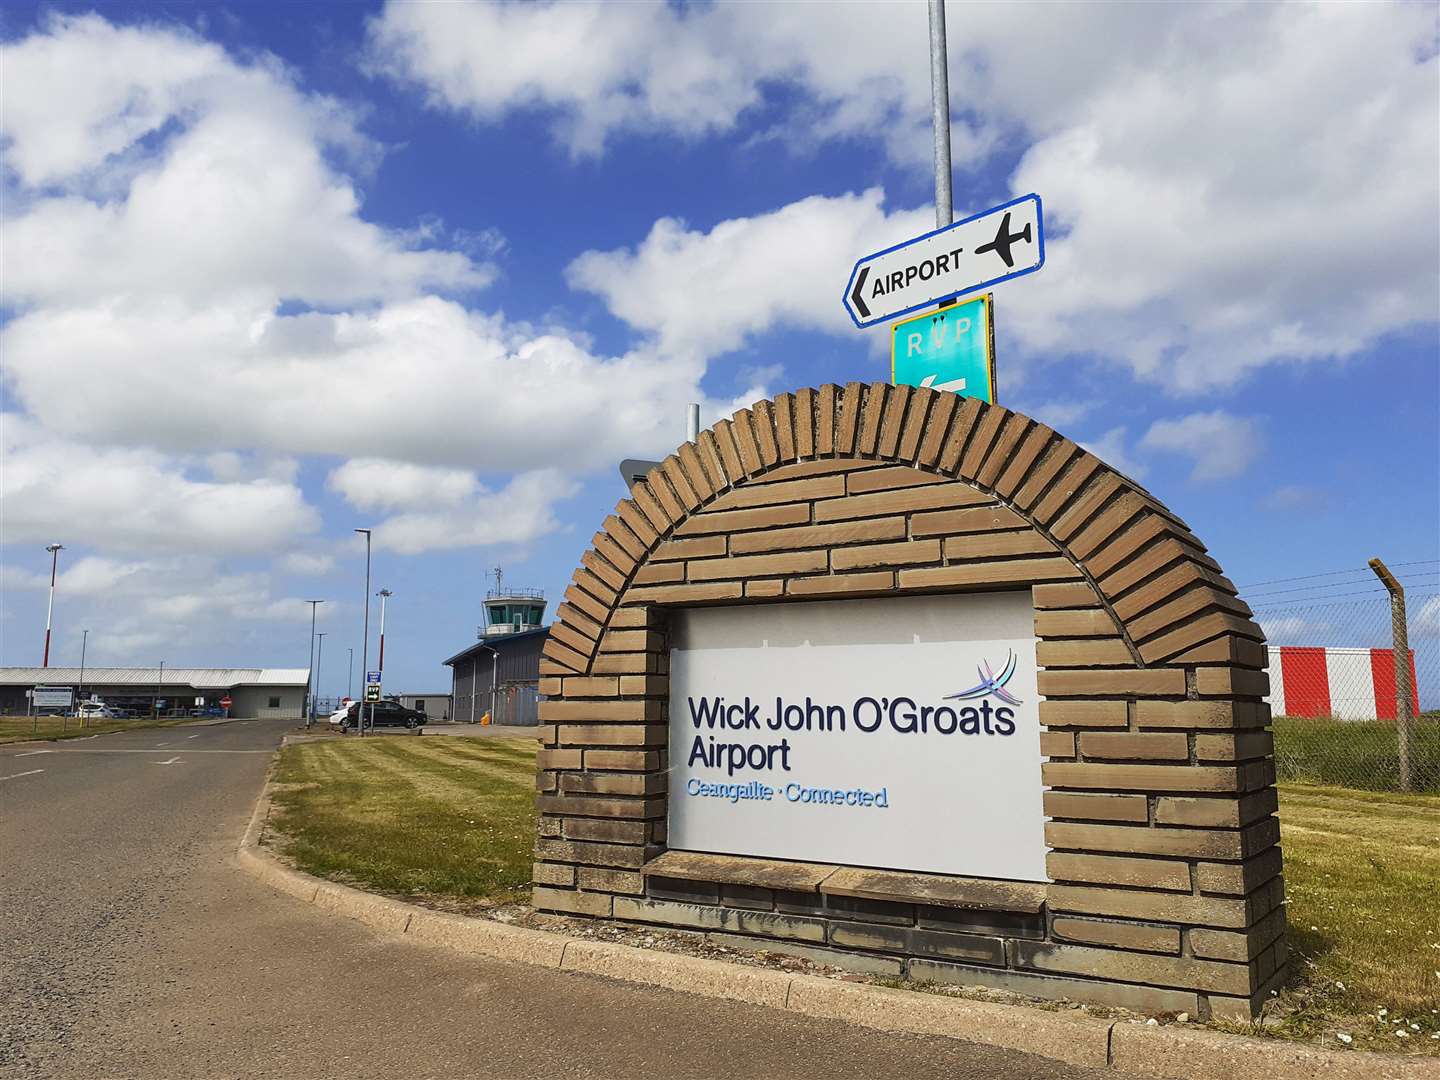 The success of Wick John O'Groats Airport is crucial to the economic future of the far north, Jamie Stone has said.